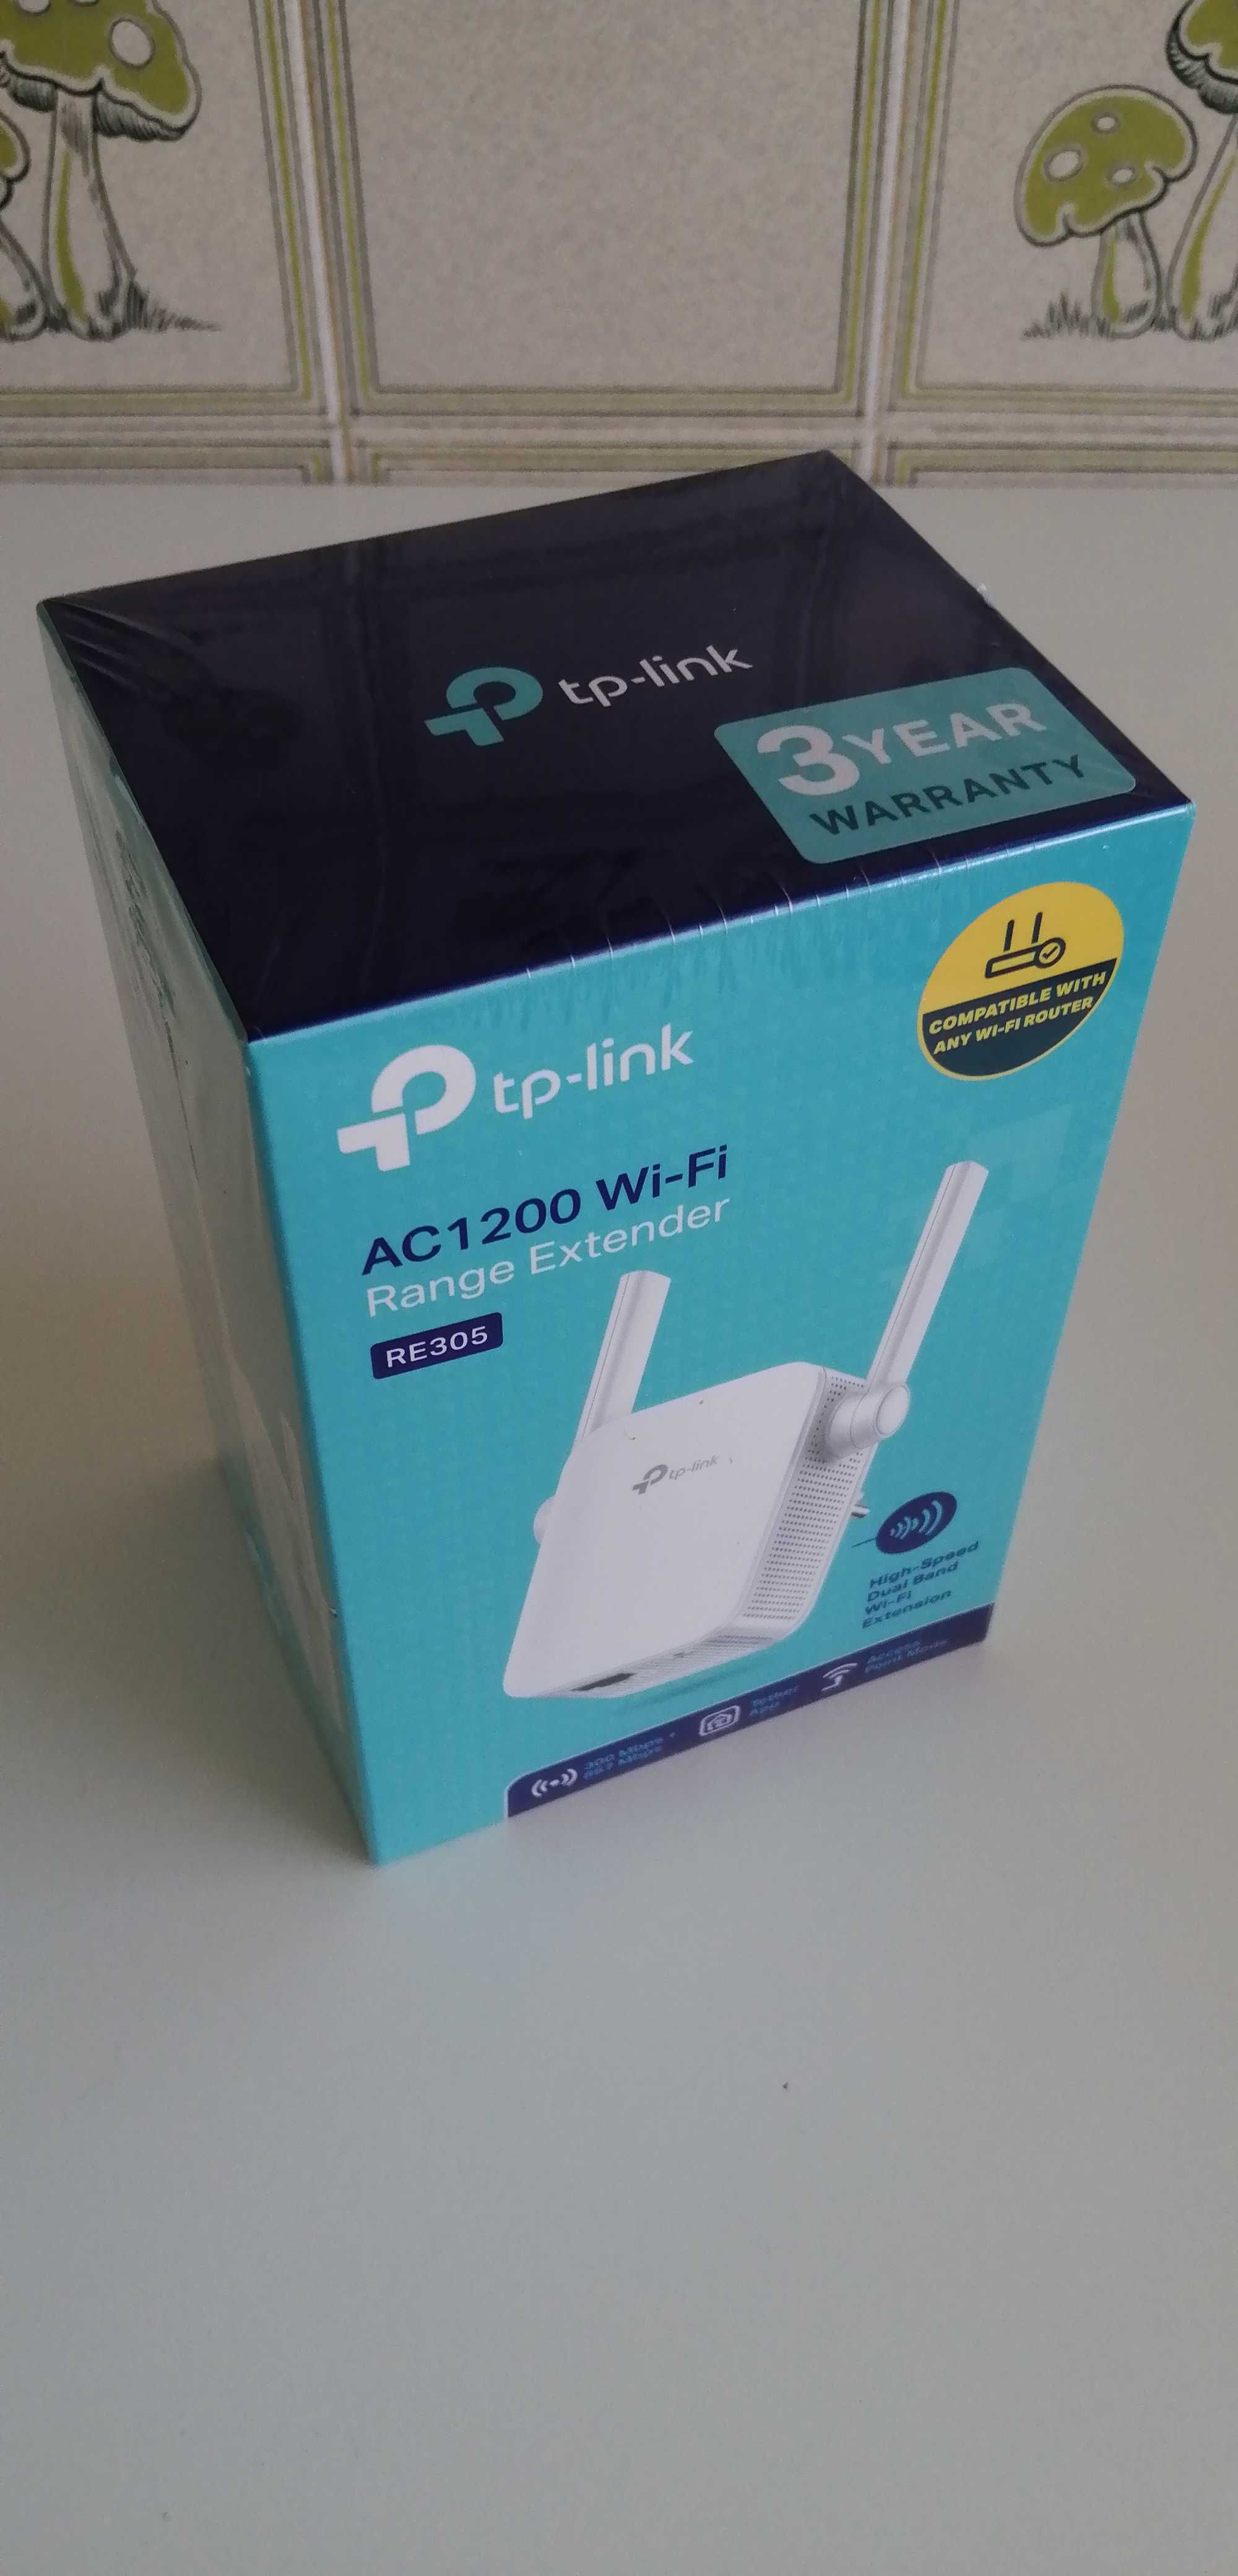 Repetidor wi-fi TP-link AC1200 / RE200/RE205 / WPA4220 Kit